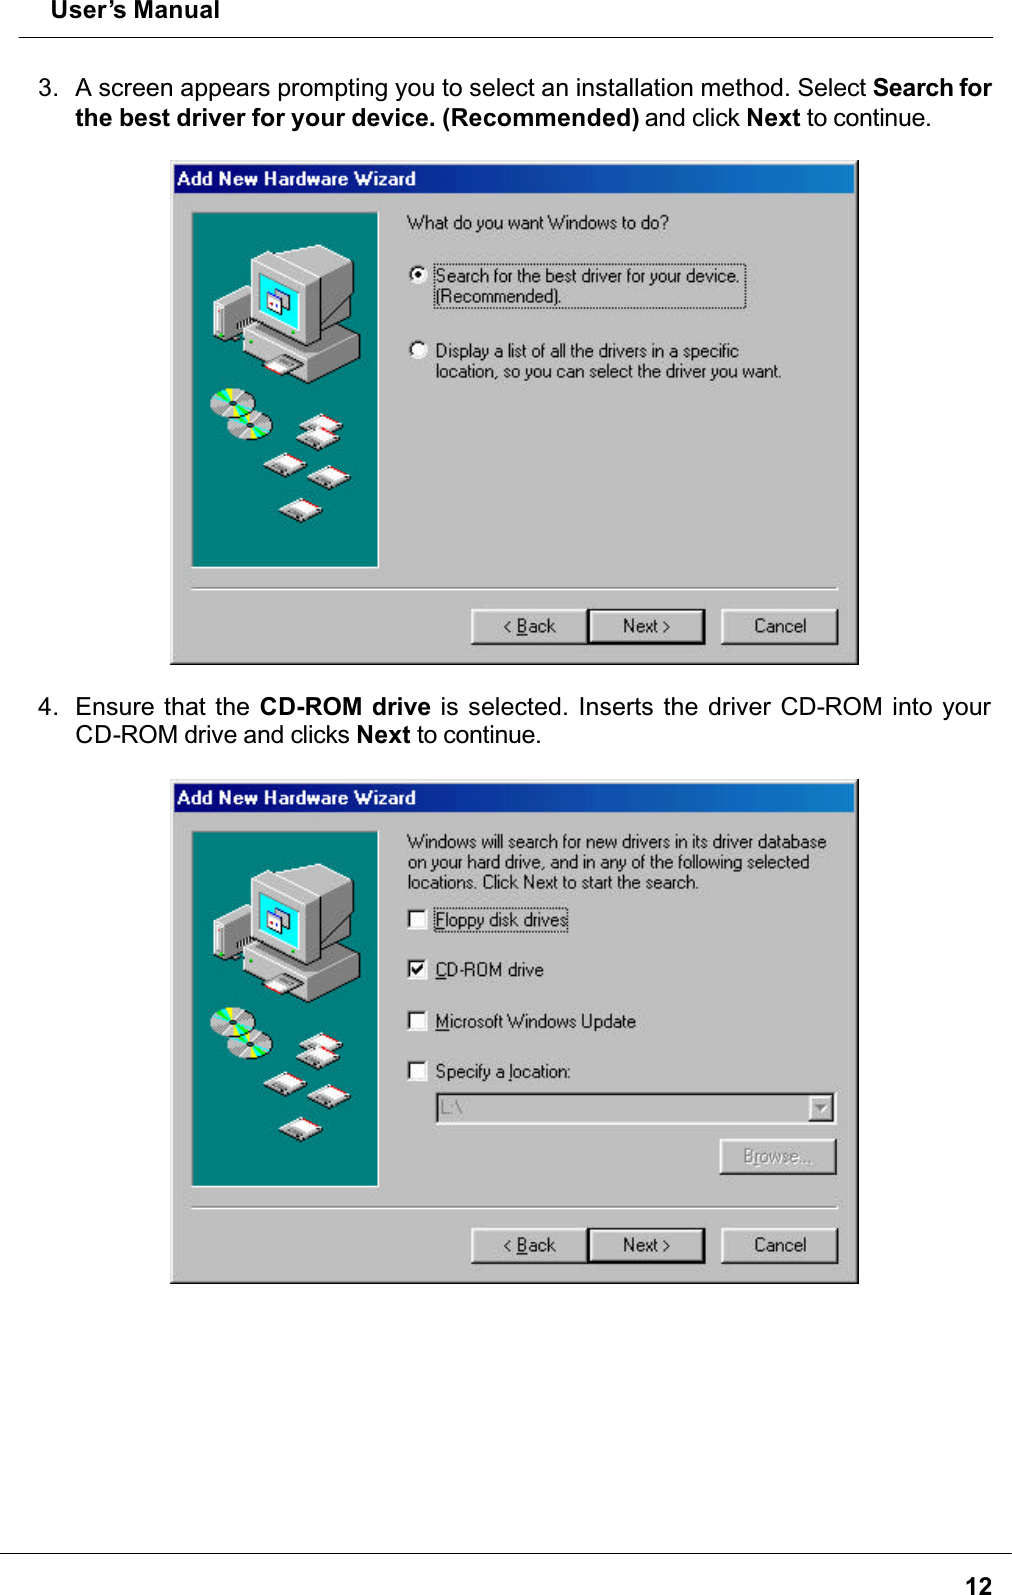  User’s Manual123. A screen appears prompting you to select an installation method. Select Search for the best driver for your device. (Recommended) and click Next to continue.4. Ensure that the CD-ROM drive is selected. Inserts the driver CD-ROM into your CD-ROM drive and clicks Next to continue.